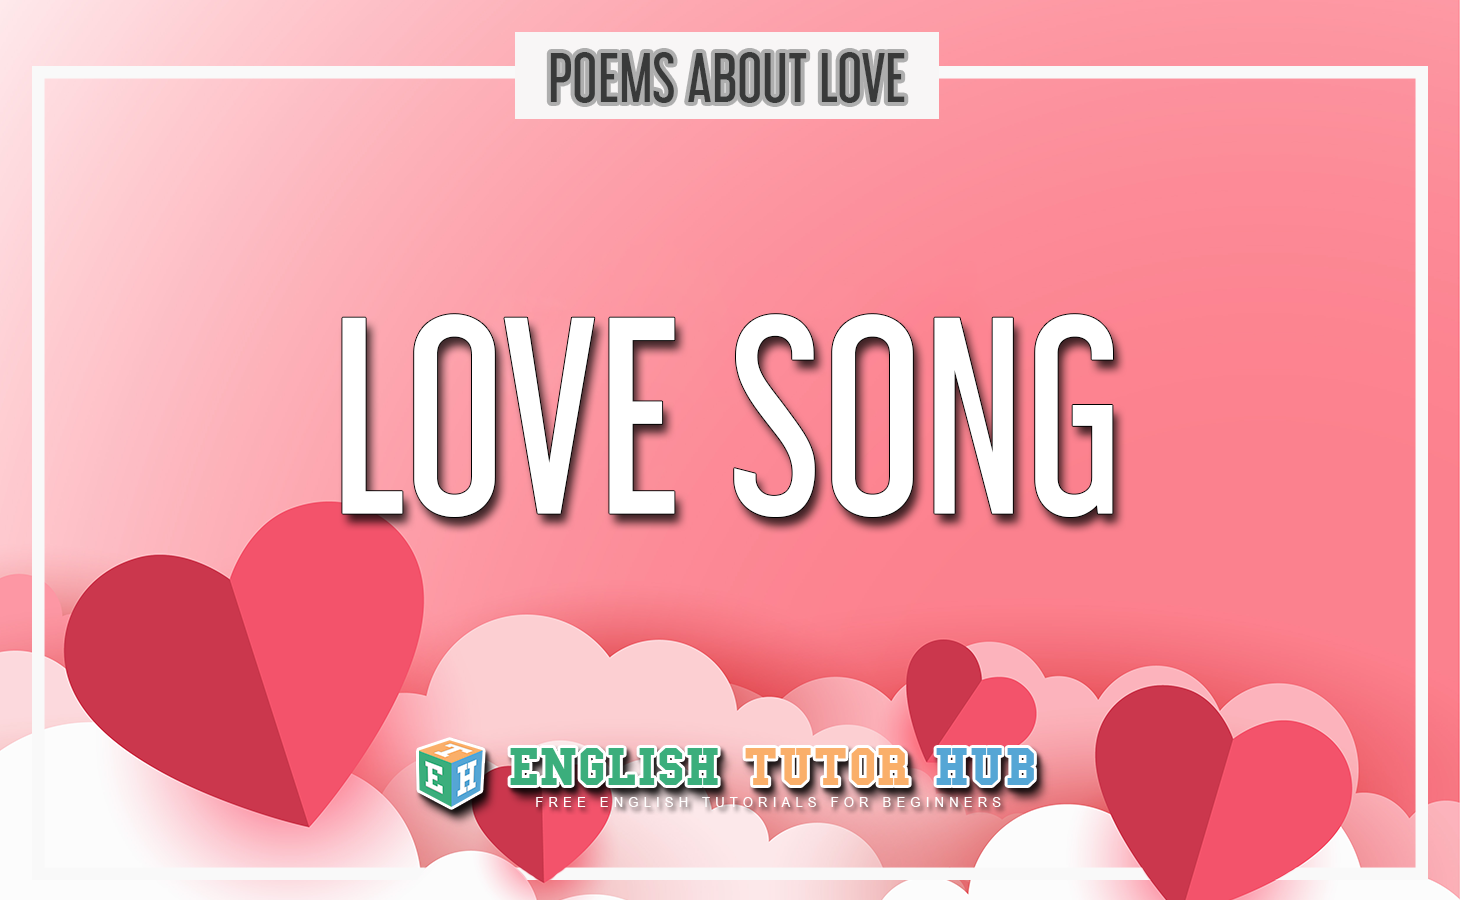 Love Song By William Carlos Williams - Summary and Lesson [2022]